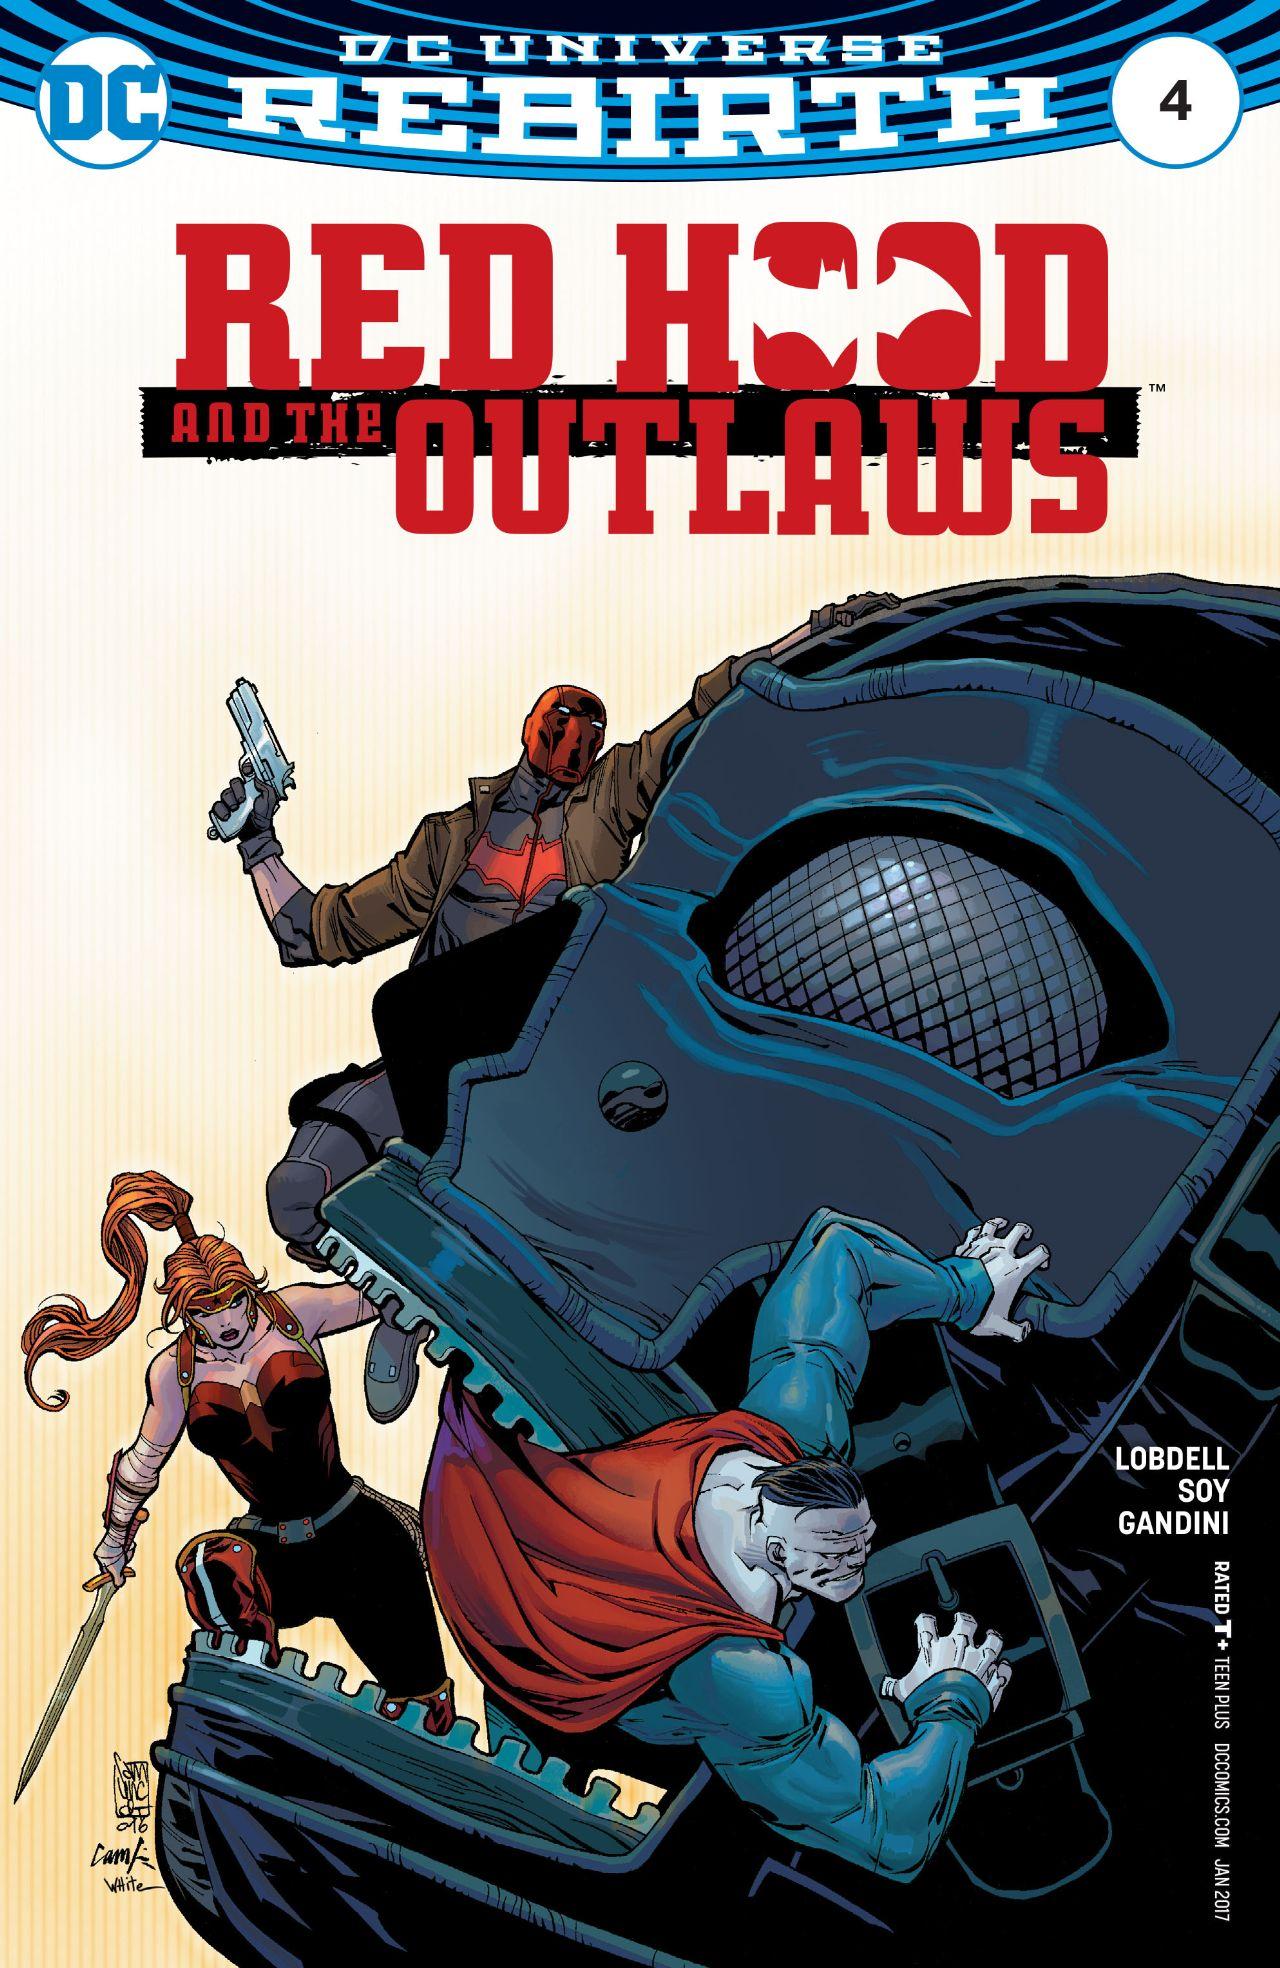 Red Hood and the Outlaws Vol. 2 #4